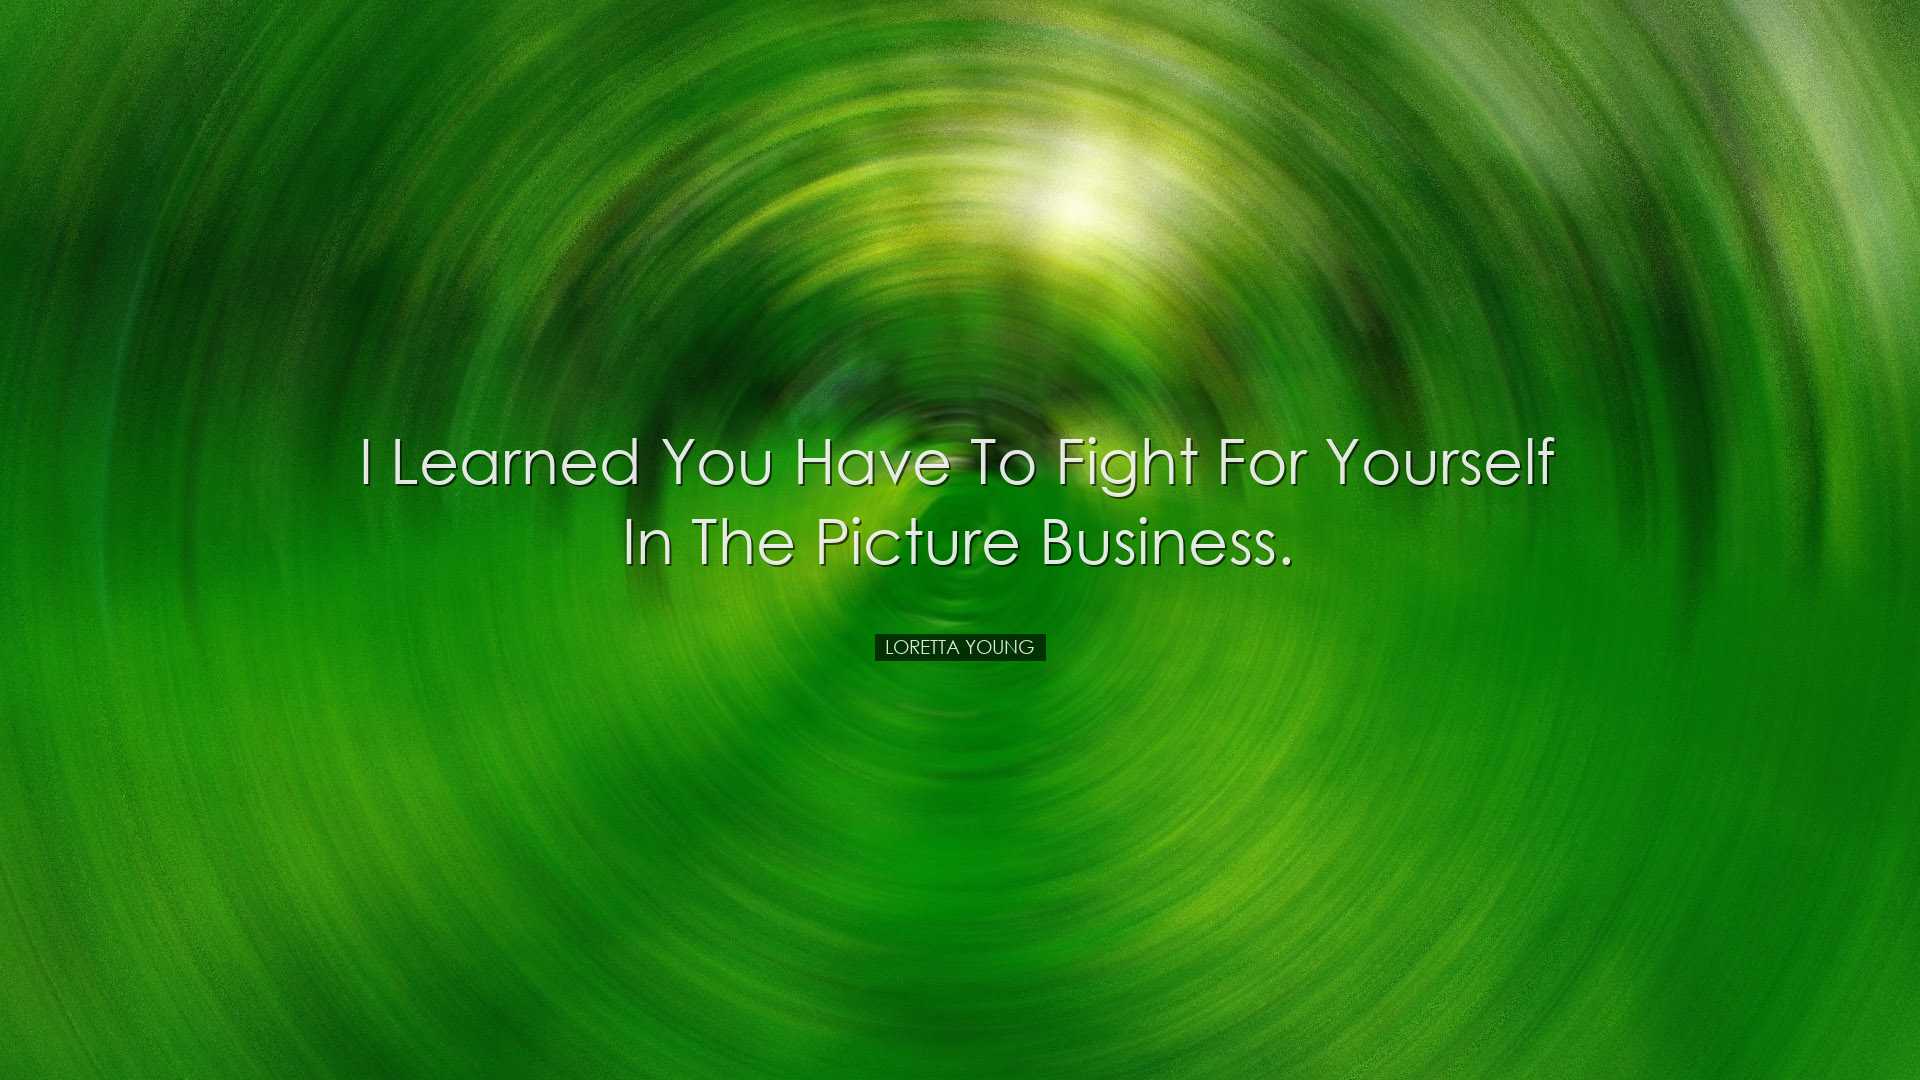 I learned you have to fight for yourself in the picture business.